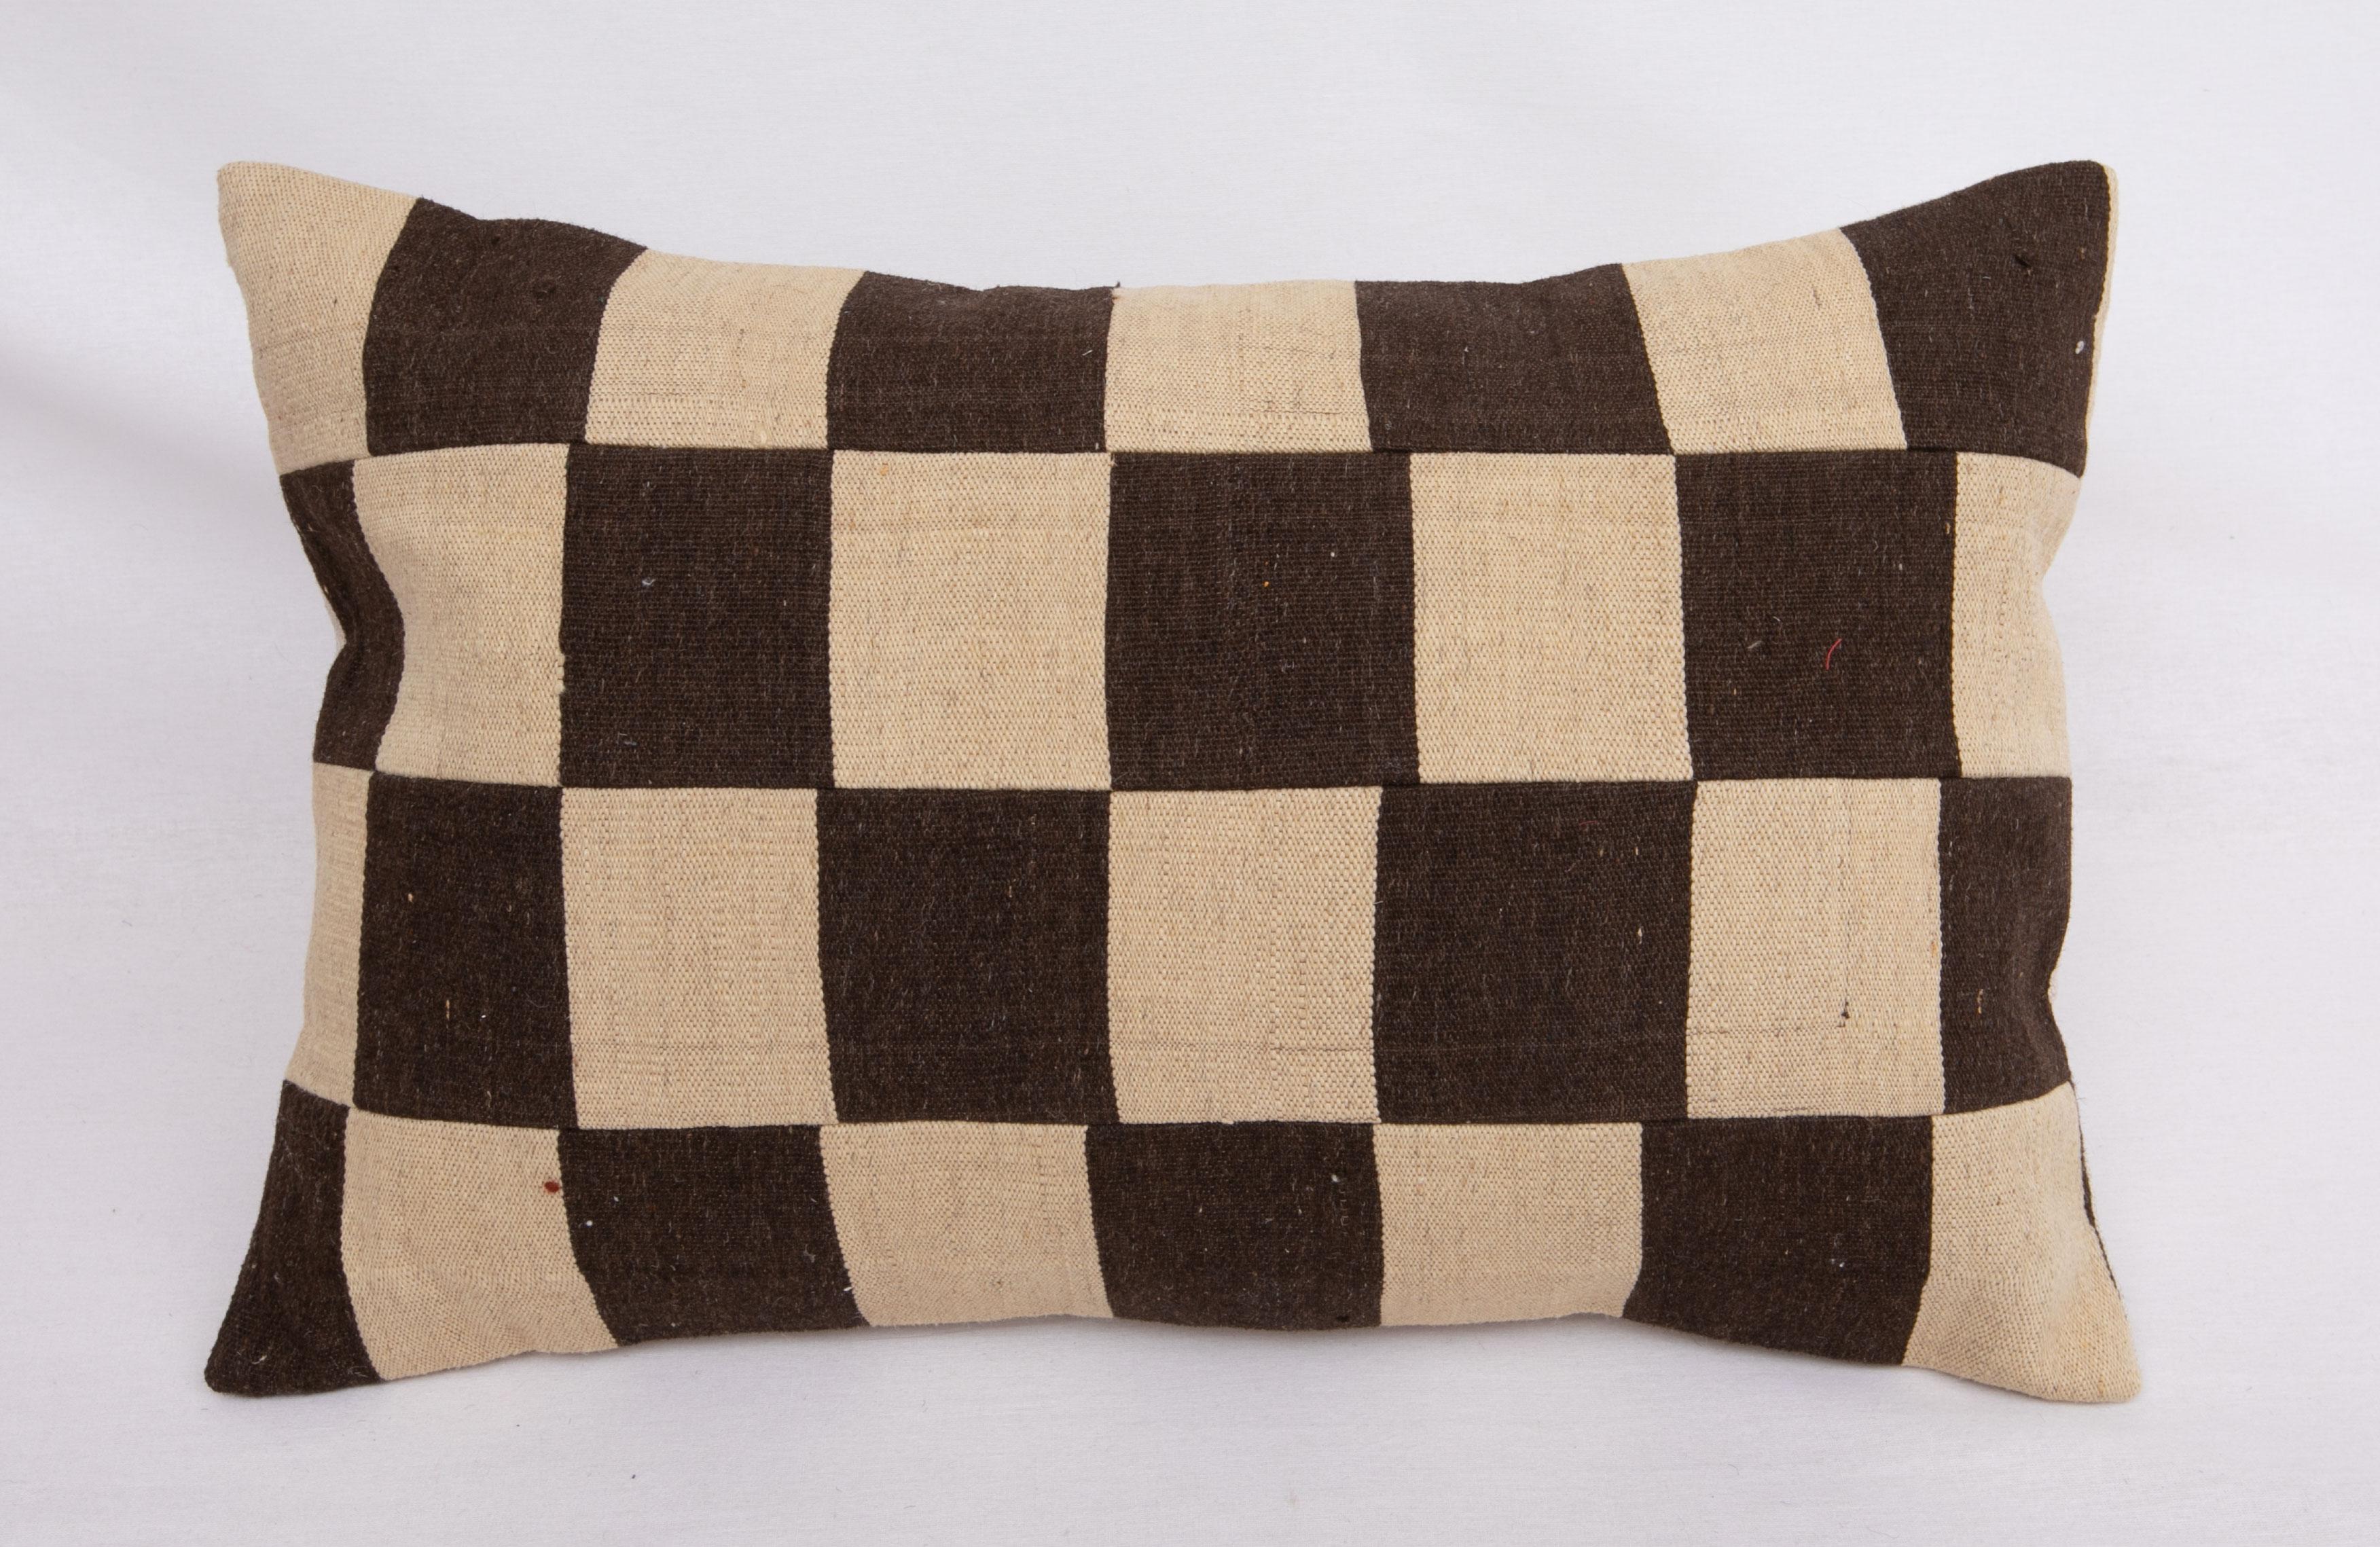 Turkish Pillow Cases with Chequers Design Fashioned from a Mid 20th C Flat Weave